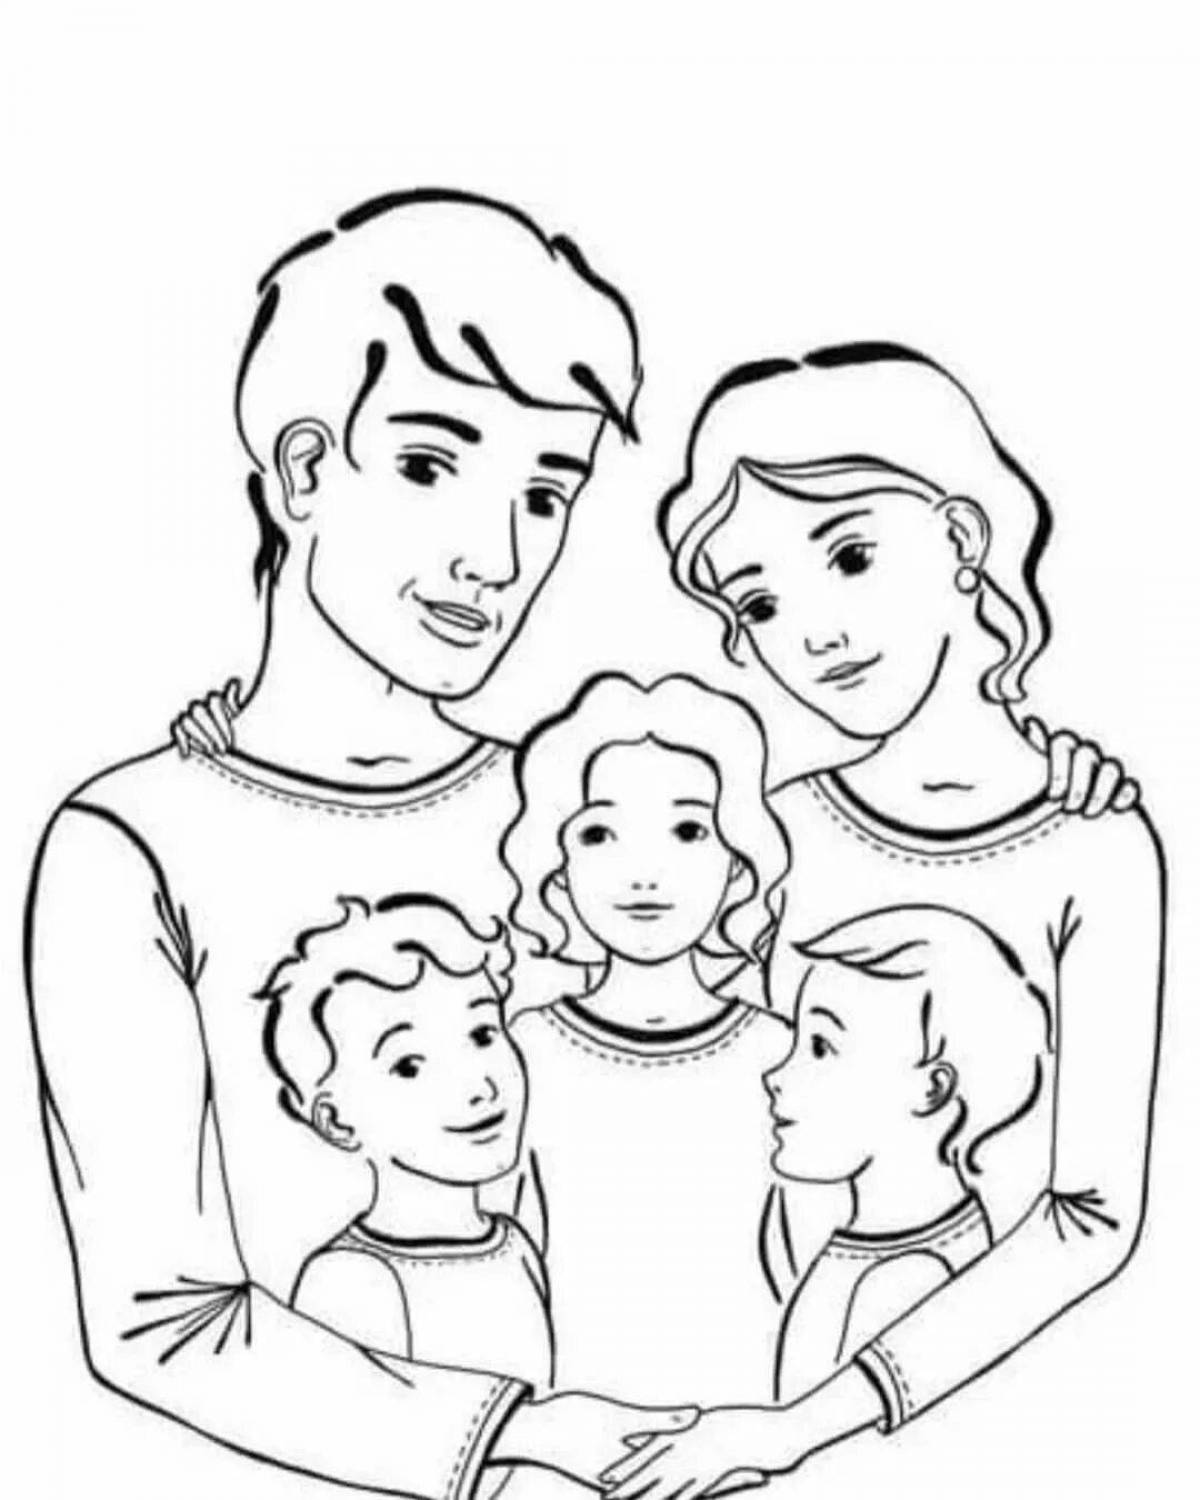 Glowing mom and dad coloring pages for kids